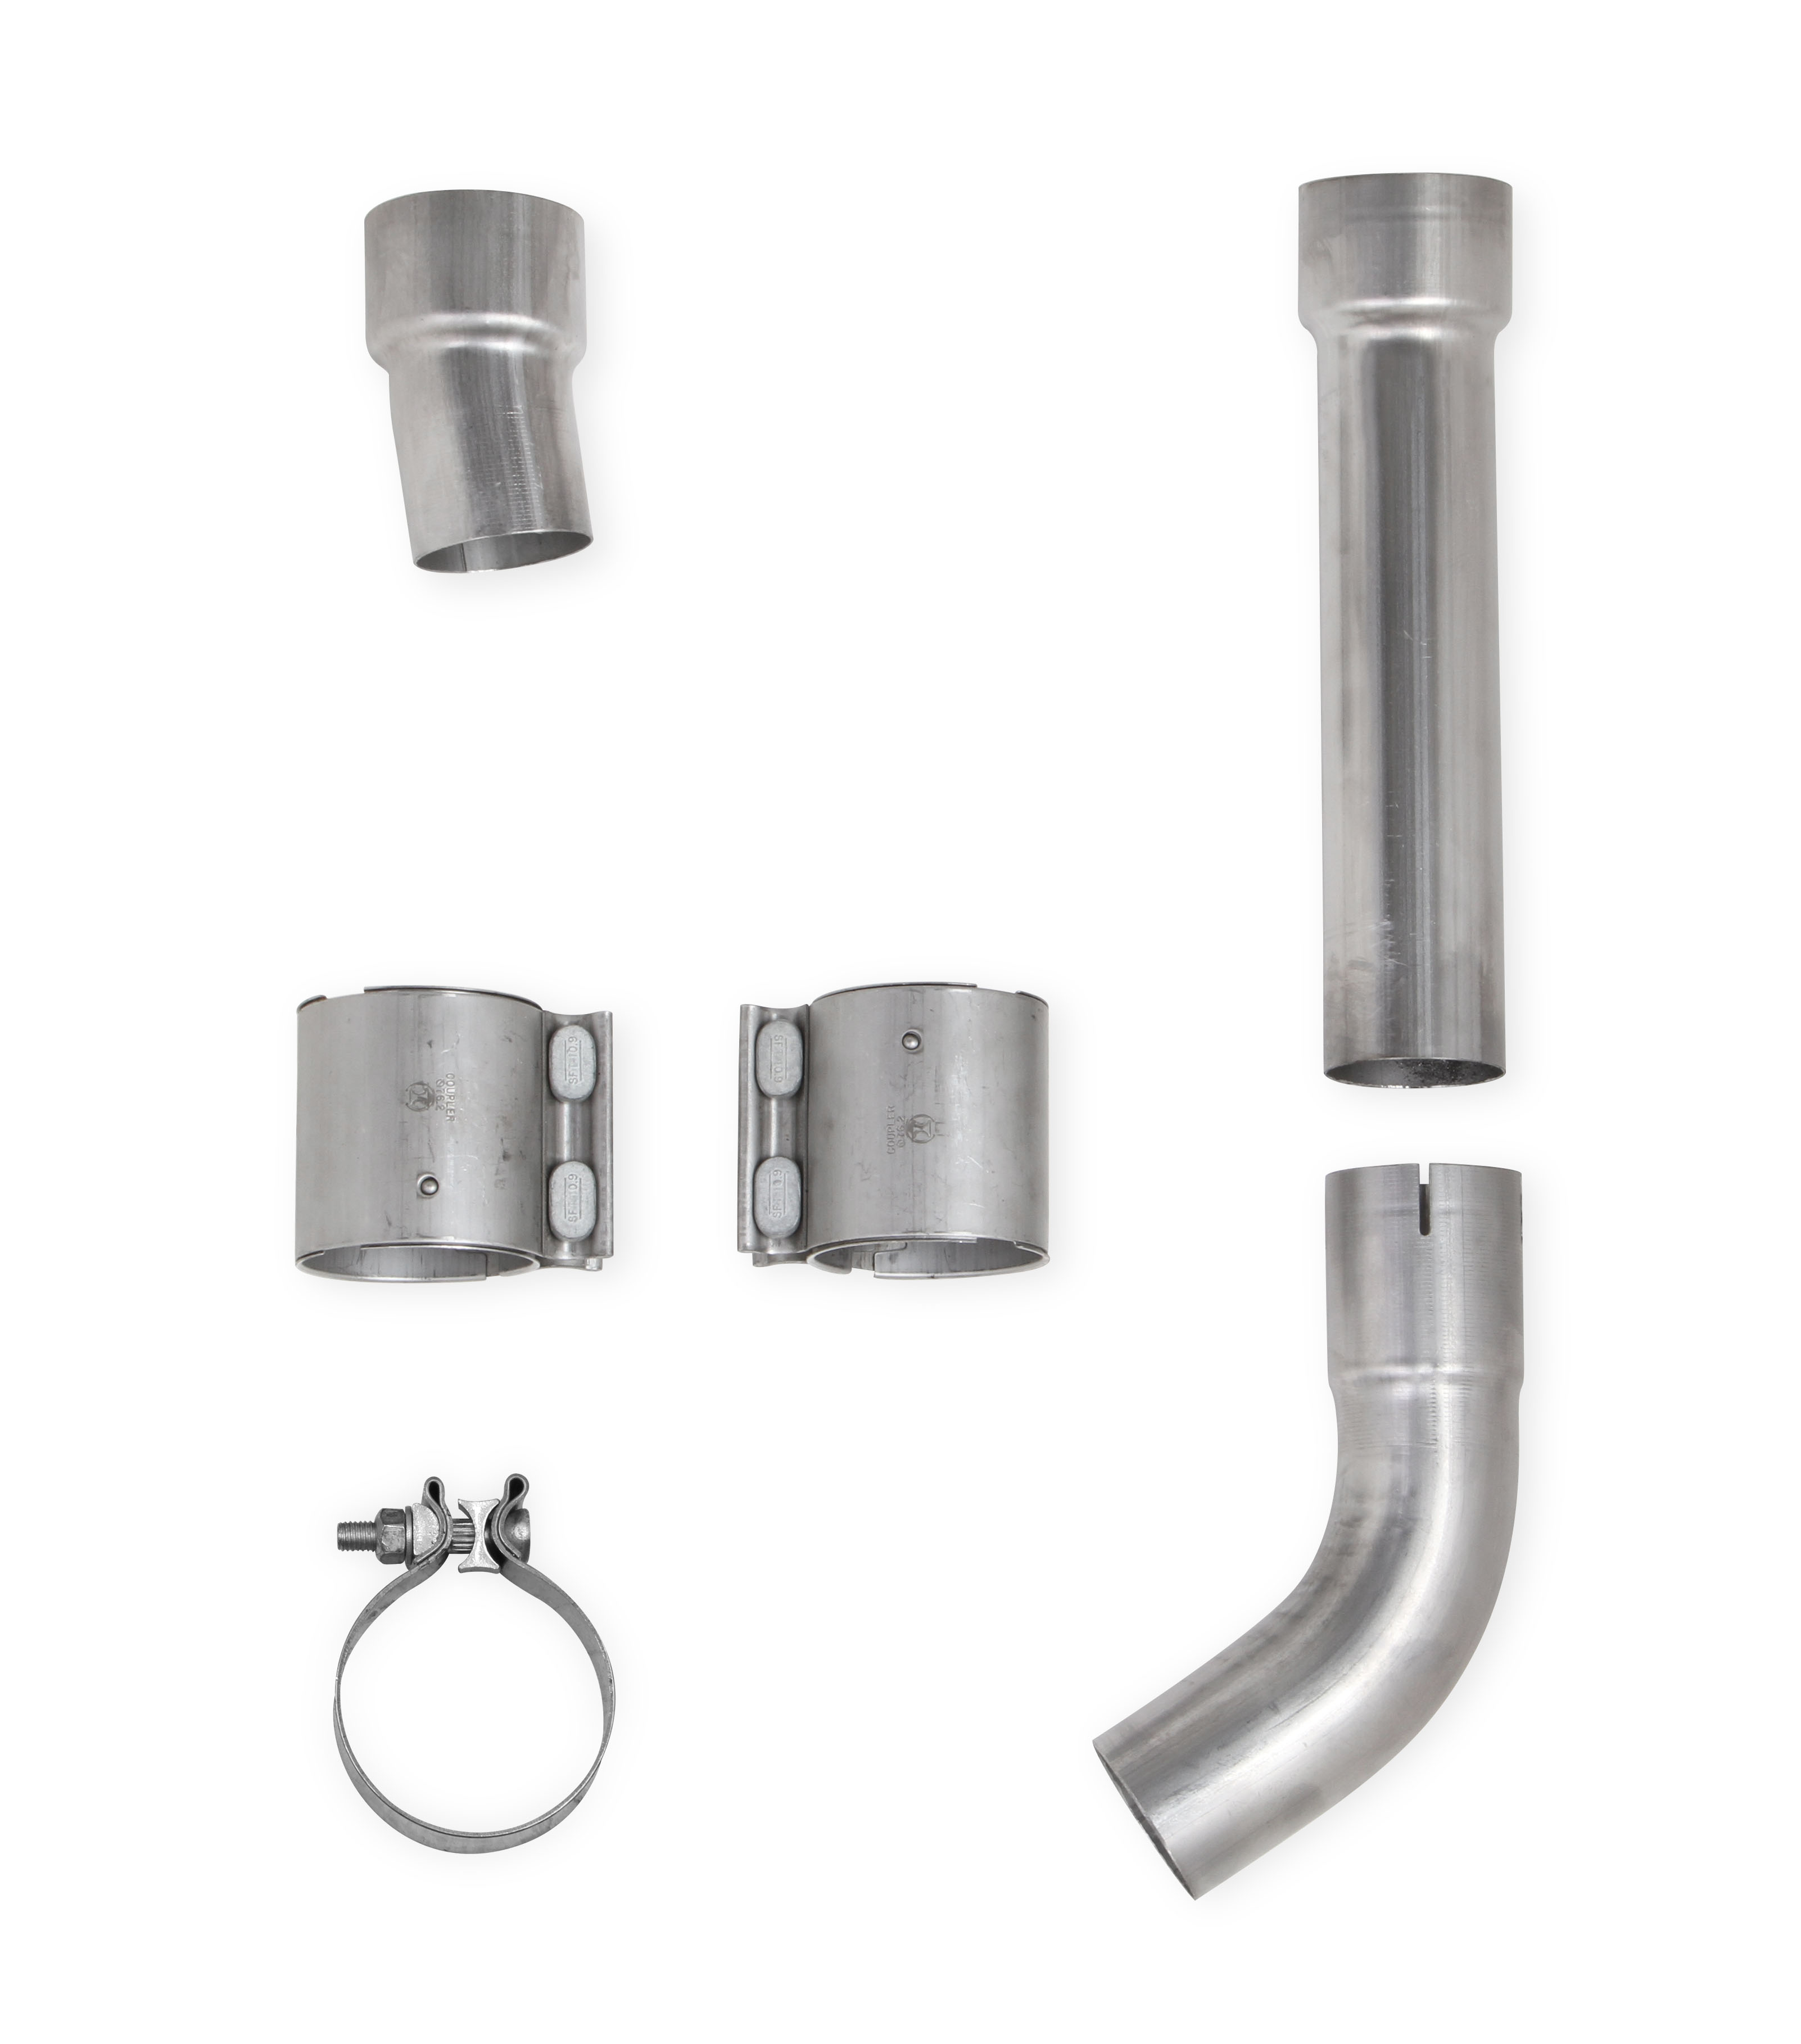 98-02 LS1 Fbody Hooker Headers Blackheart Race Only 409 SS Adapter Pipes - Converts Dual Exhaust to Fit Long Tube Headers